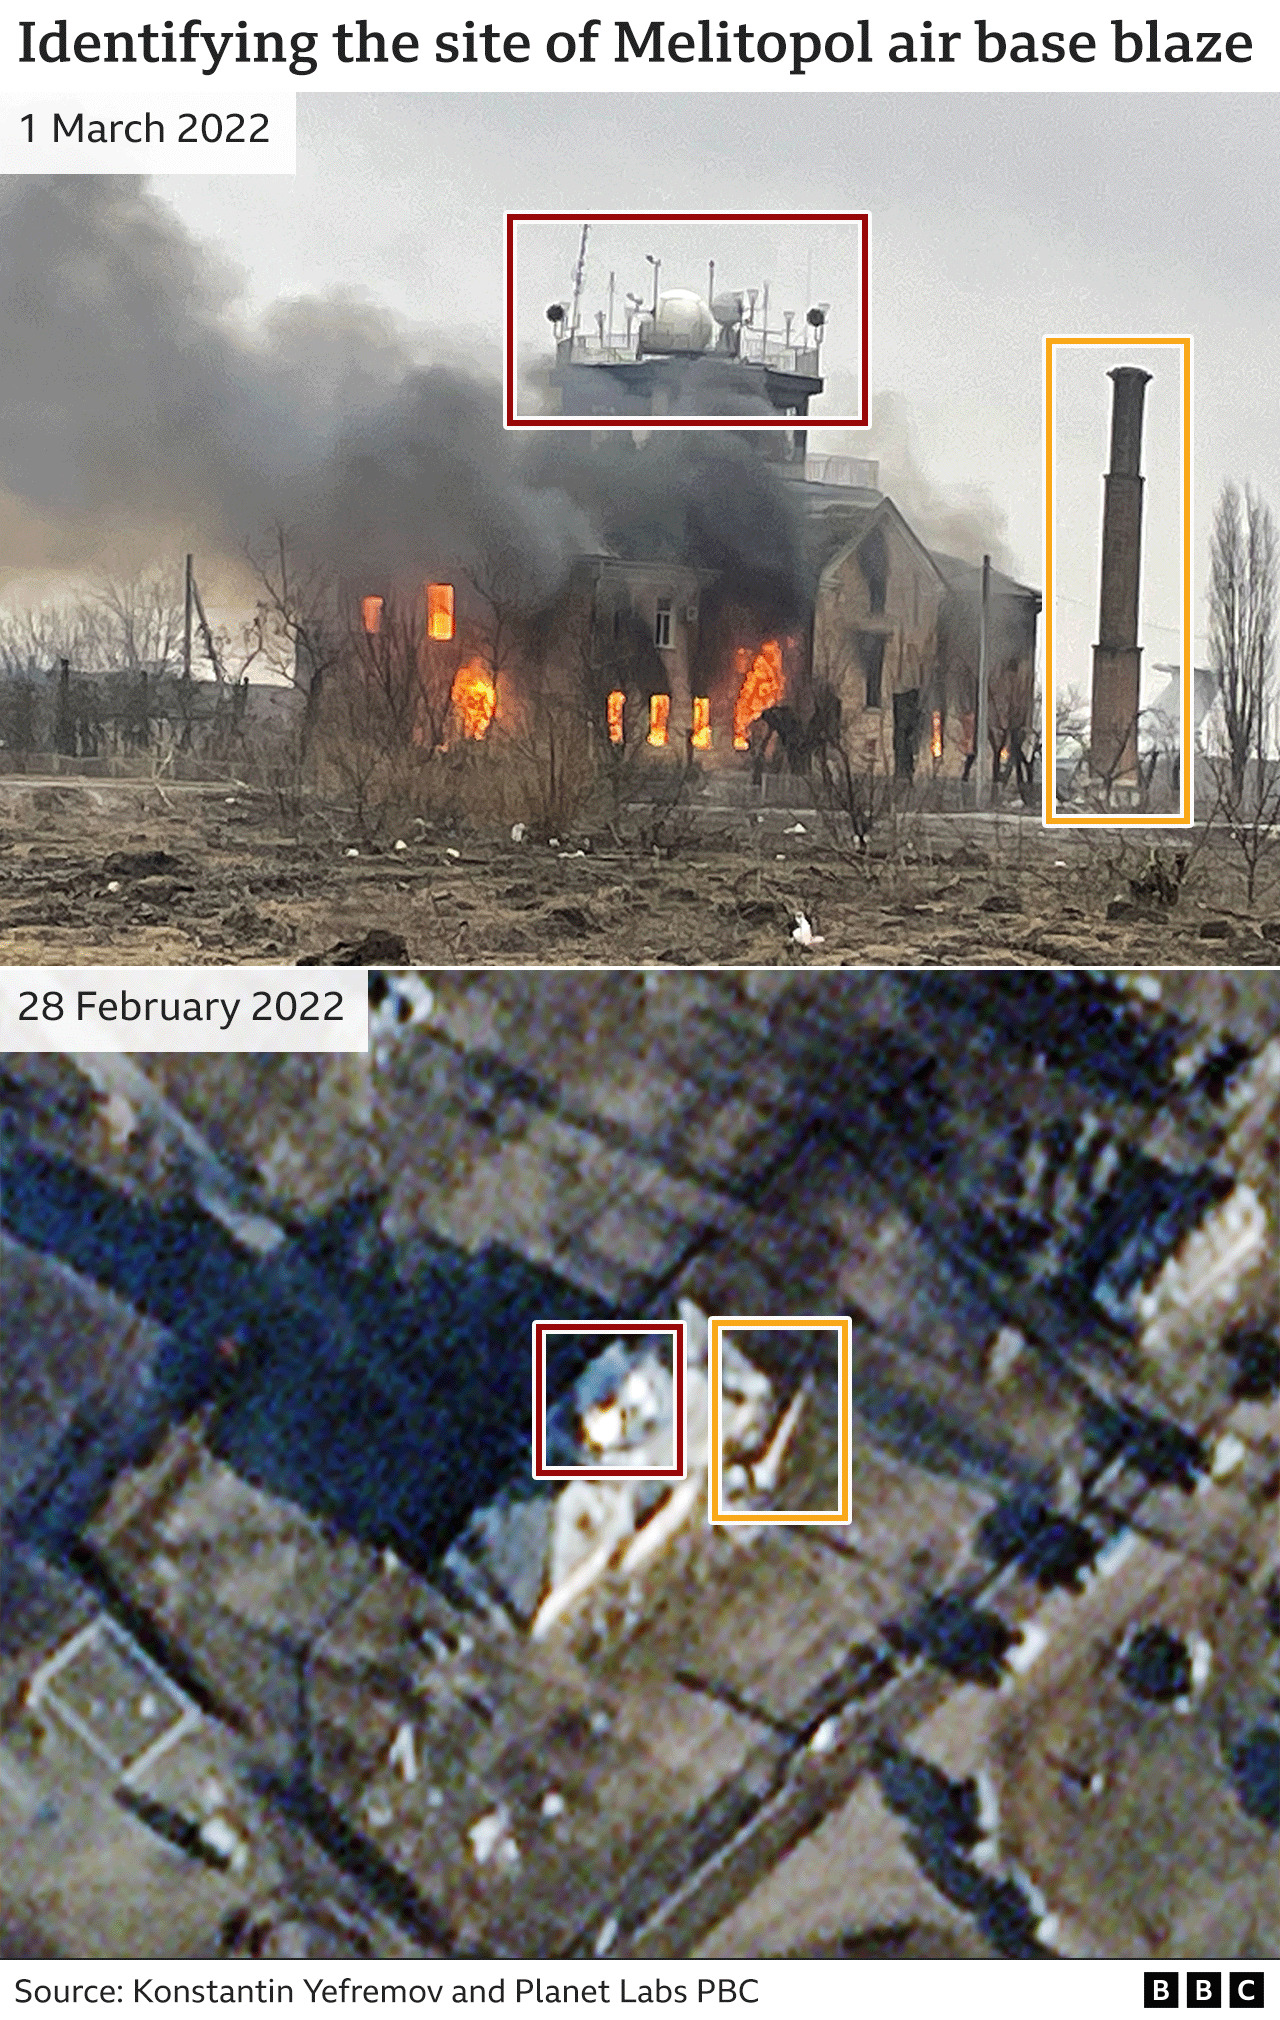 Photo showing Melitopol air base building on fire from 1 March 2022 - and a satellite view of the site from the day before, confirming its location